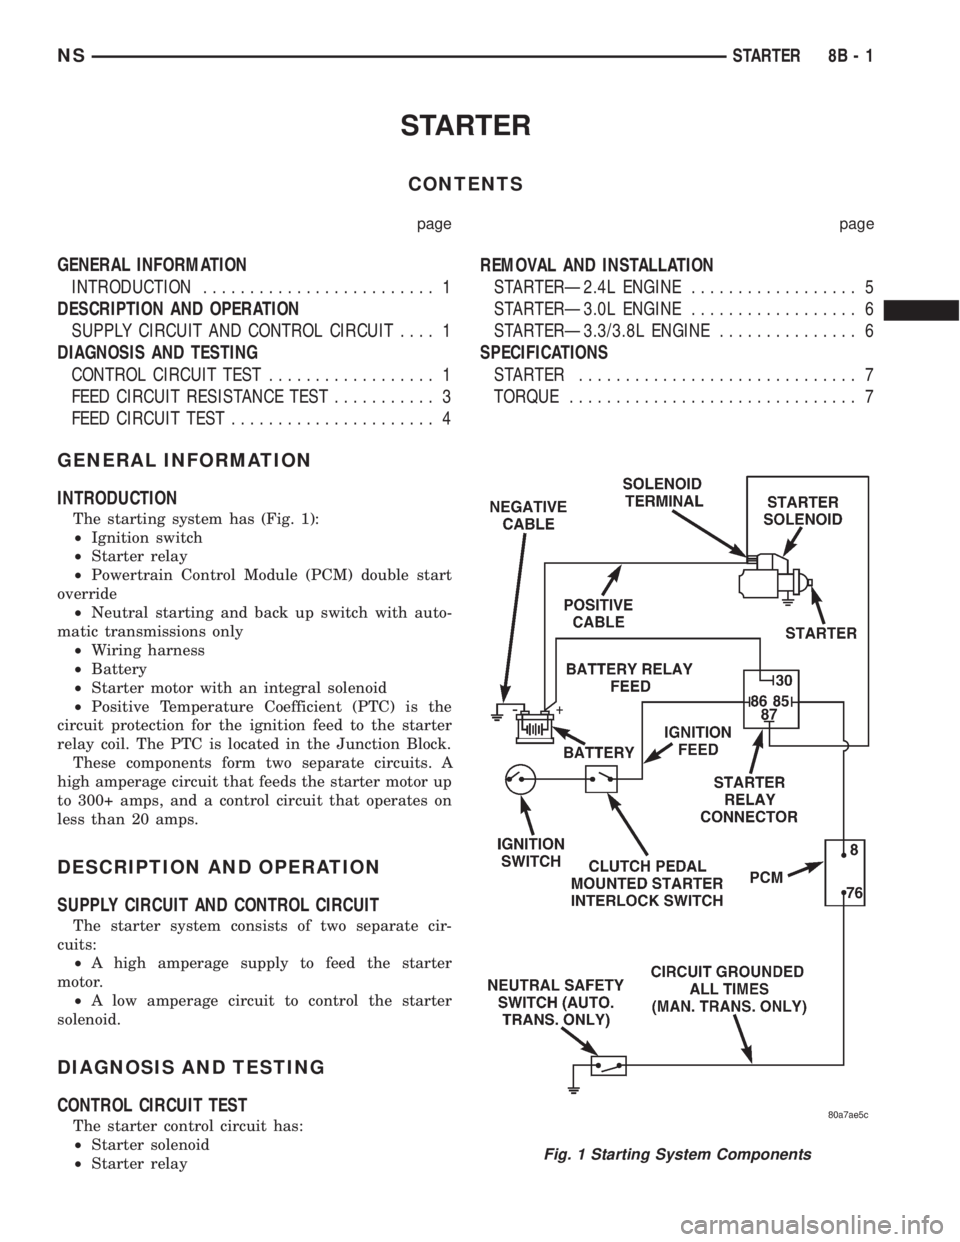 CHRYSLER VOYAGER 1996  Service Manual STARTER
CONTENTS
page page
GENERAL INFORMATION
INTRODUCTION......................... 1
DESCRIPTION AND OPERATION
SUPPLY CIRCUIT AND CONTROL CIRCUIT.... 1
DIAGNOSIS AND TESTING
CONTROL CIRCUIT TEST....